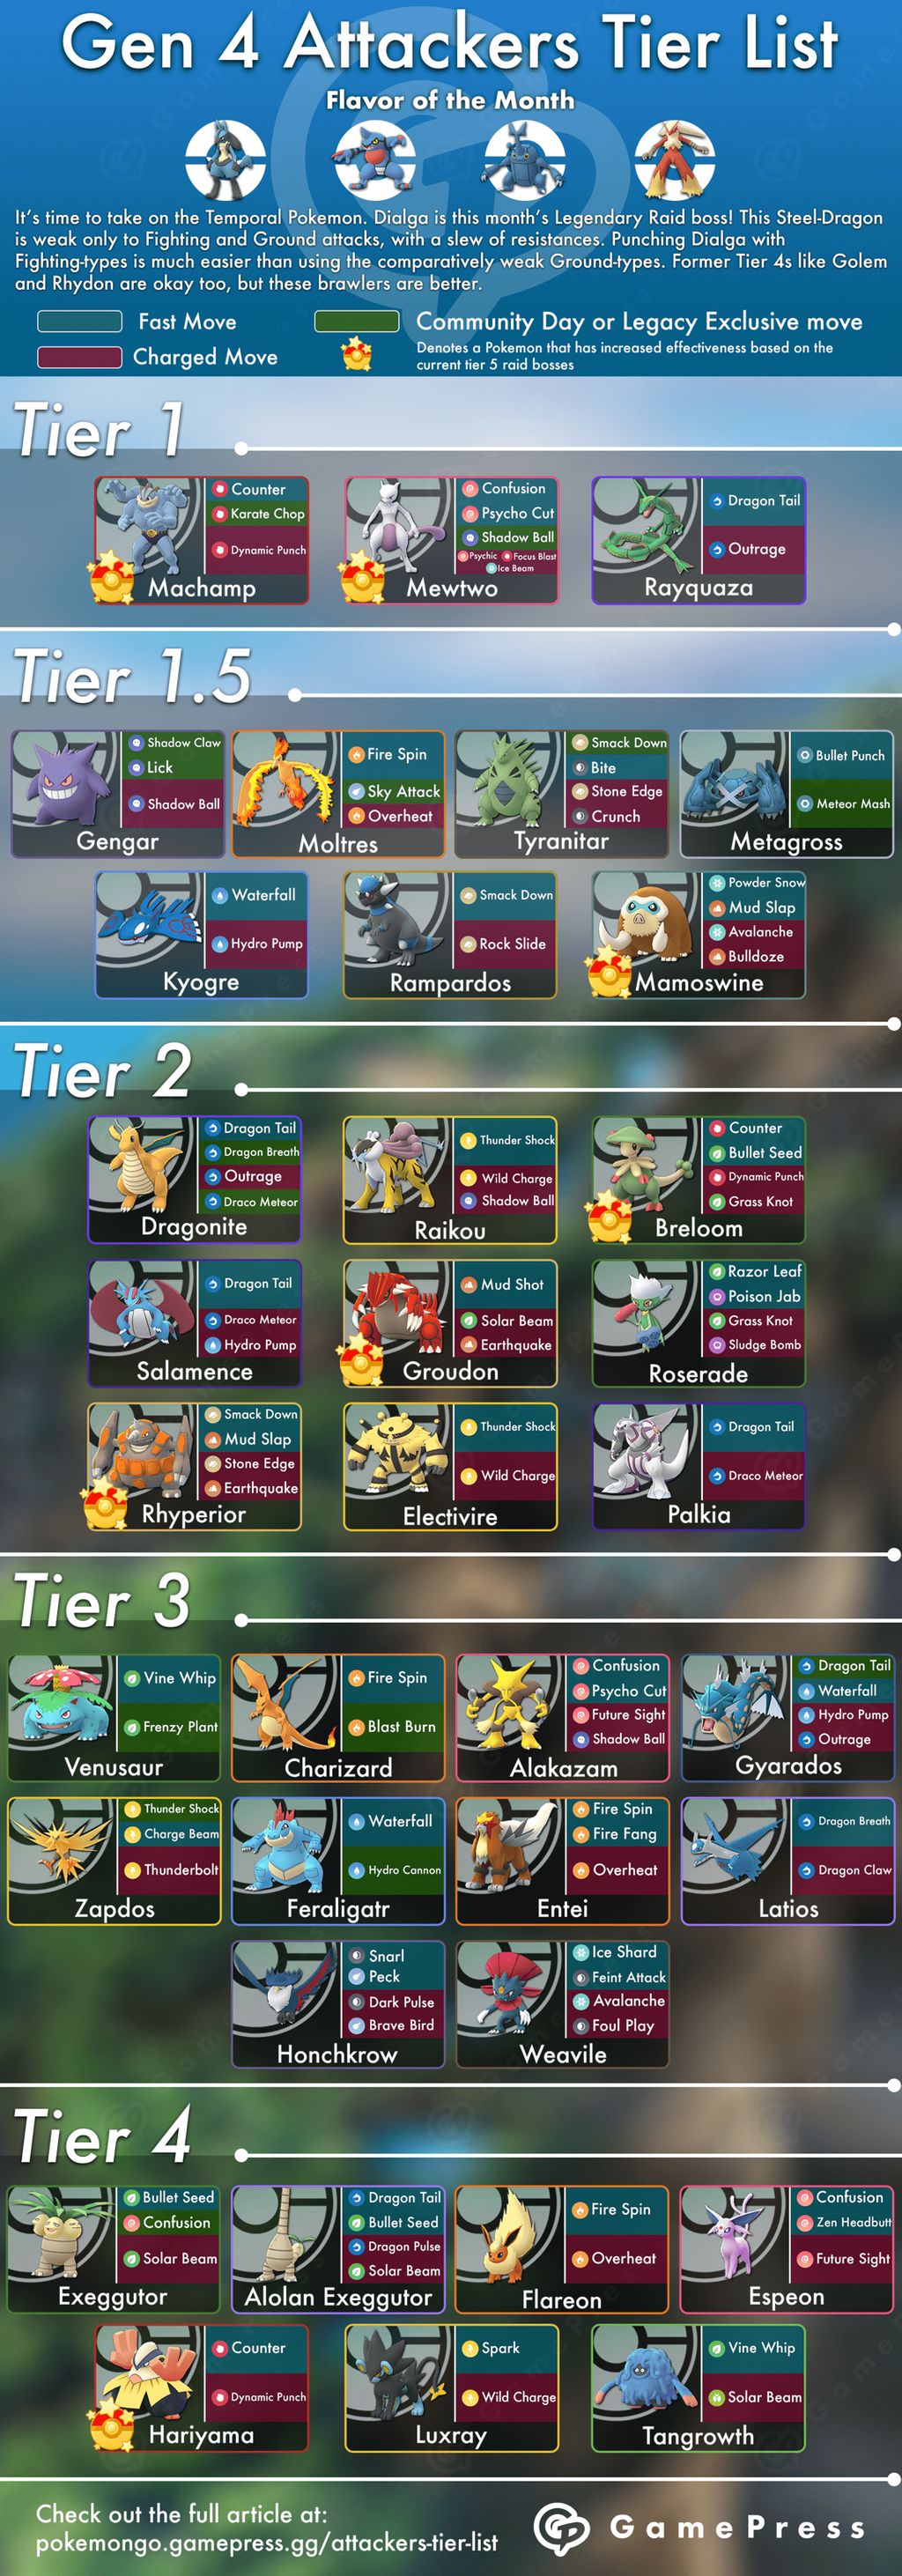 talentfulde Muskuløs Tilgivende GamePress | Pokémon GO on Twitter: "Our @PokemonGoApp Top Attackers Tier  List has been updated: - New: Rampardos 🦖 - Flavor of the Month: Fighting  &amp; Ground Types 🥊 ⛰ - Dialga: